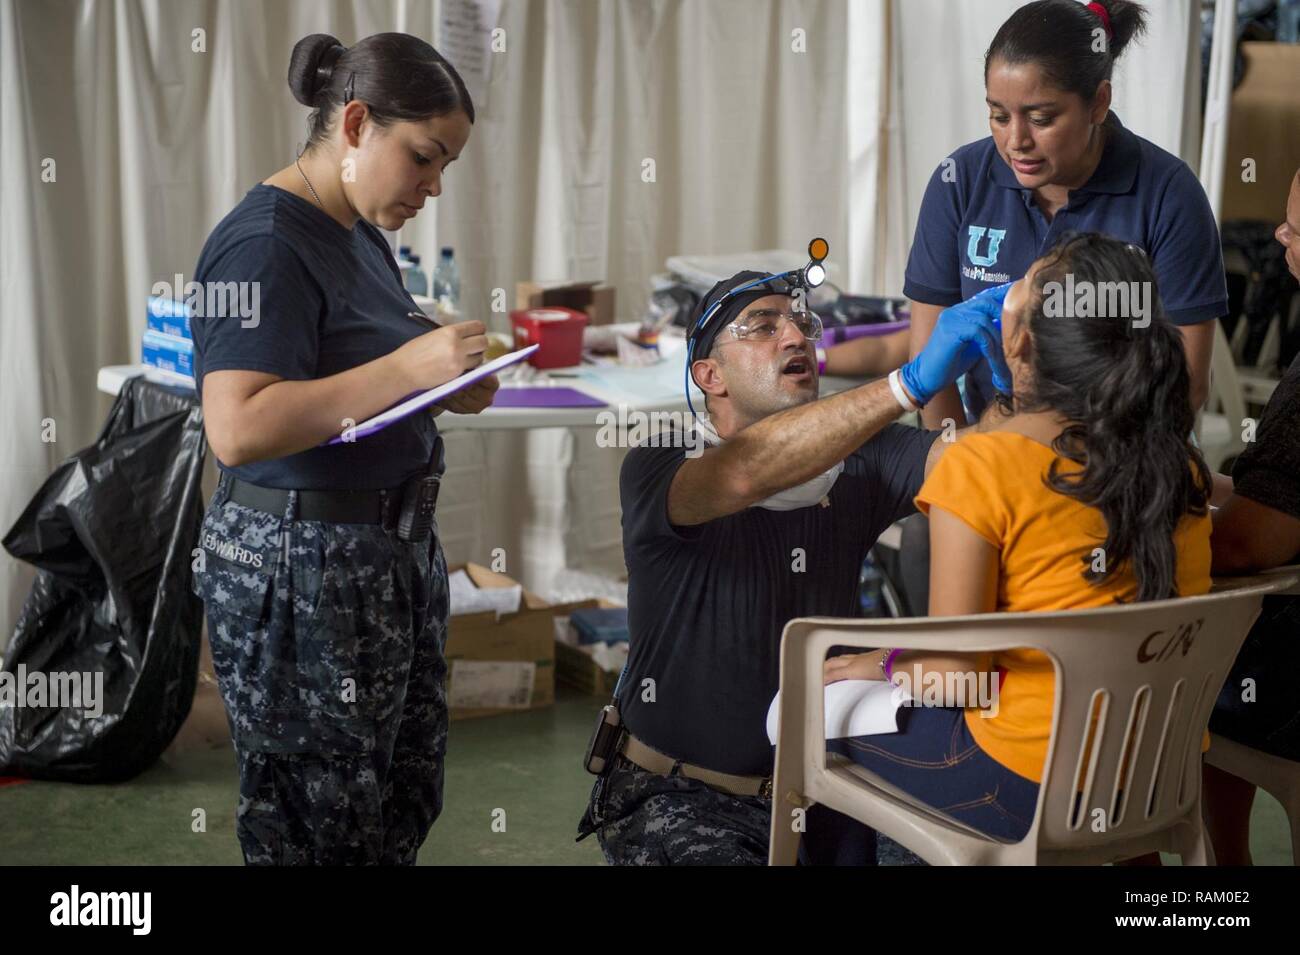 PUERTO BARRIOS, Guatemala (Feb. 10, 2017) - Lt. Farid Hamidzadeh, a native of Fort Lauderdale, Fla., attached to Naval Hospital Jacksonville, Fla., performs an oral exam while Hospital Corpsman 2nd Class Justine Edwards, a native of Albuquerque, N.M., assigned to Naval Medical Center Portsmouth, Va., logs the exam's findings at the Continuing Promise 2017 (CP-17) medical site in support of CP-17's visit to Puerto Barrios, Guatemala. CP-17 is a U.S. Southern Command-sponsored and U.S. Naval Forces Southern Command/U.S. 4th Fleet-conducted deployment to conduct civil-military operations includin Stock Photo